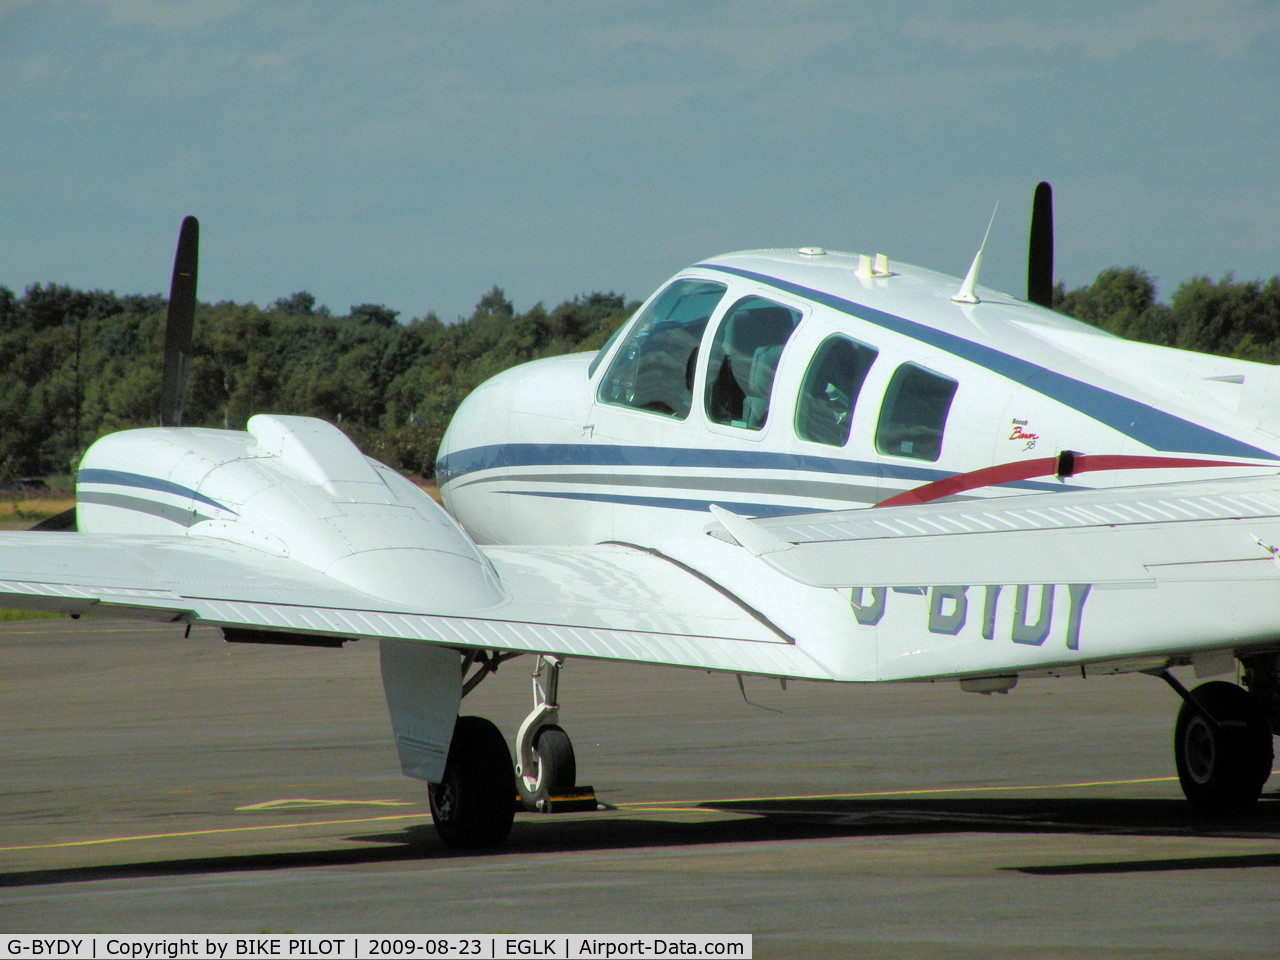 G-BYDY, 1998 Raytheon 58 Baron C/N TH-1852, PARKED IN SLOT FOUR